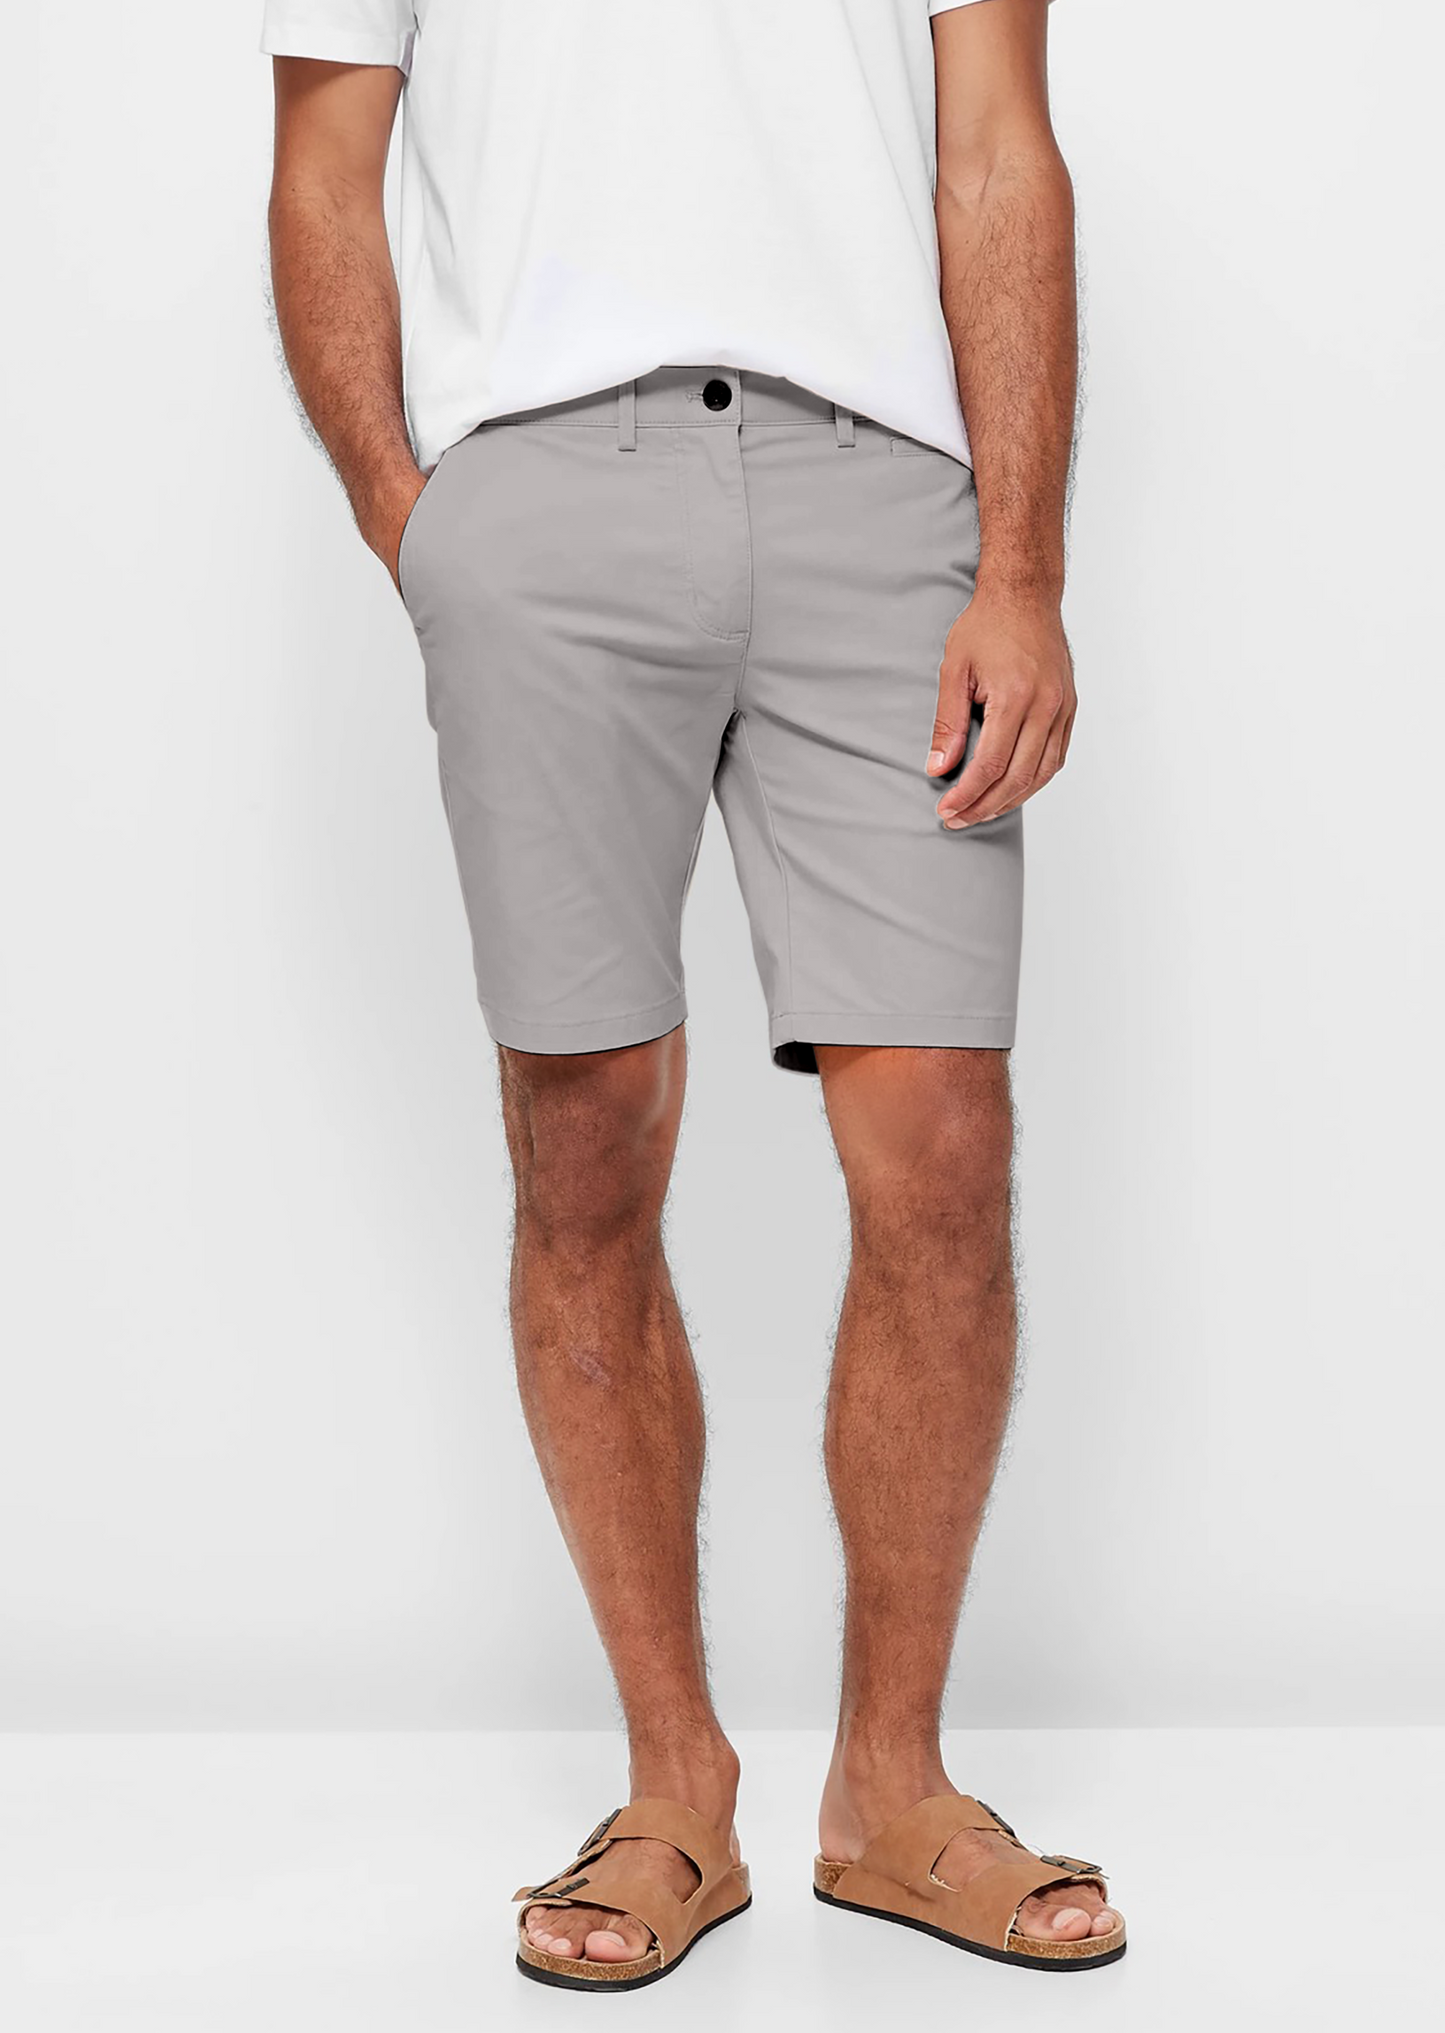 Mens Silver Grey chinos shorts with front slanted pockets, jetted back pockets. zip fly fastening and brown horne buttons on the waistband and back pockets, the fit is a slim fit, this is worn with a white tee and white t-shirt